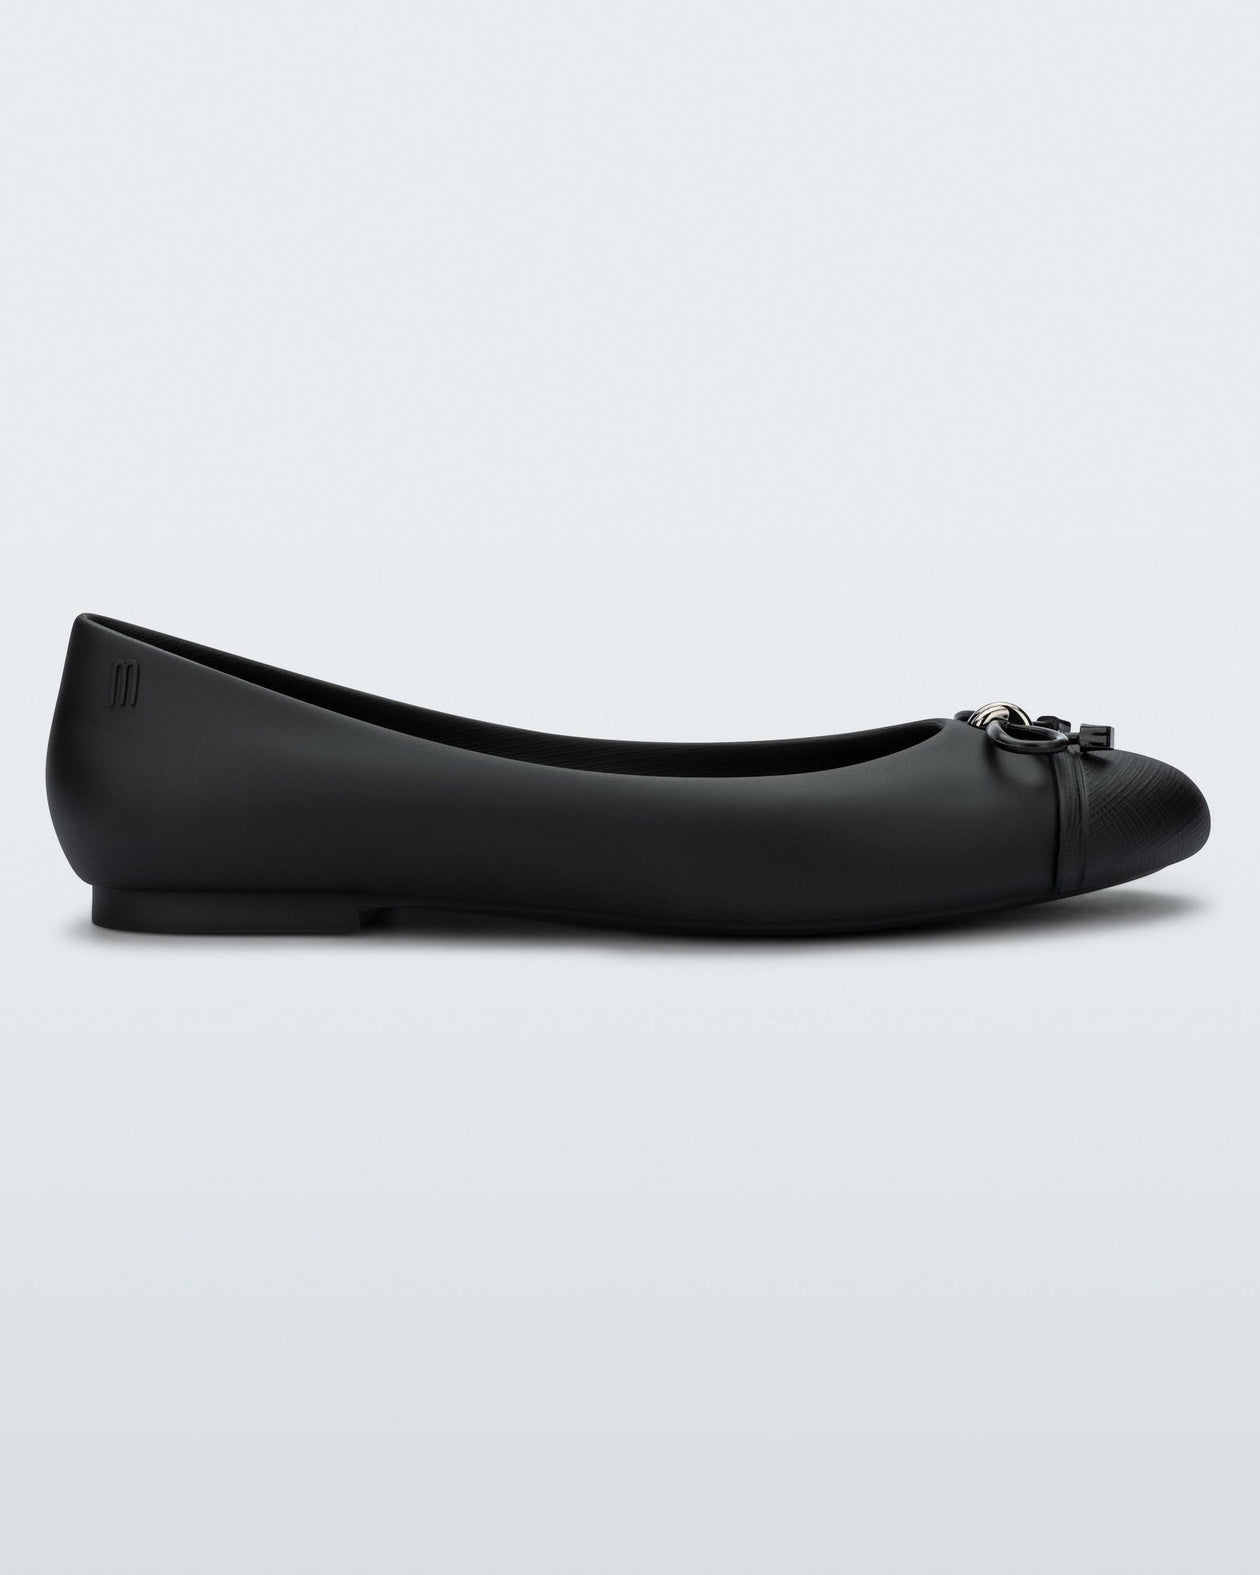 Side view of a black Melissa flat with a black bow detail with metallic accents on the toe